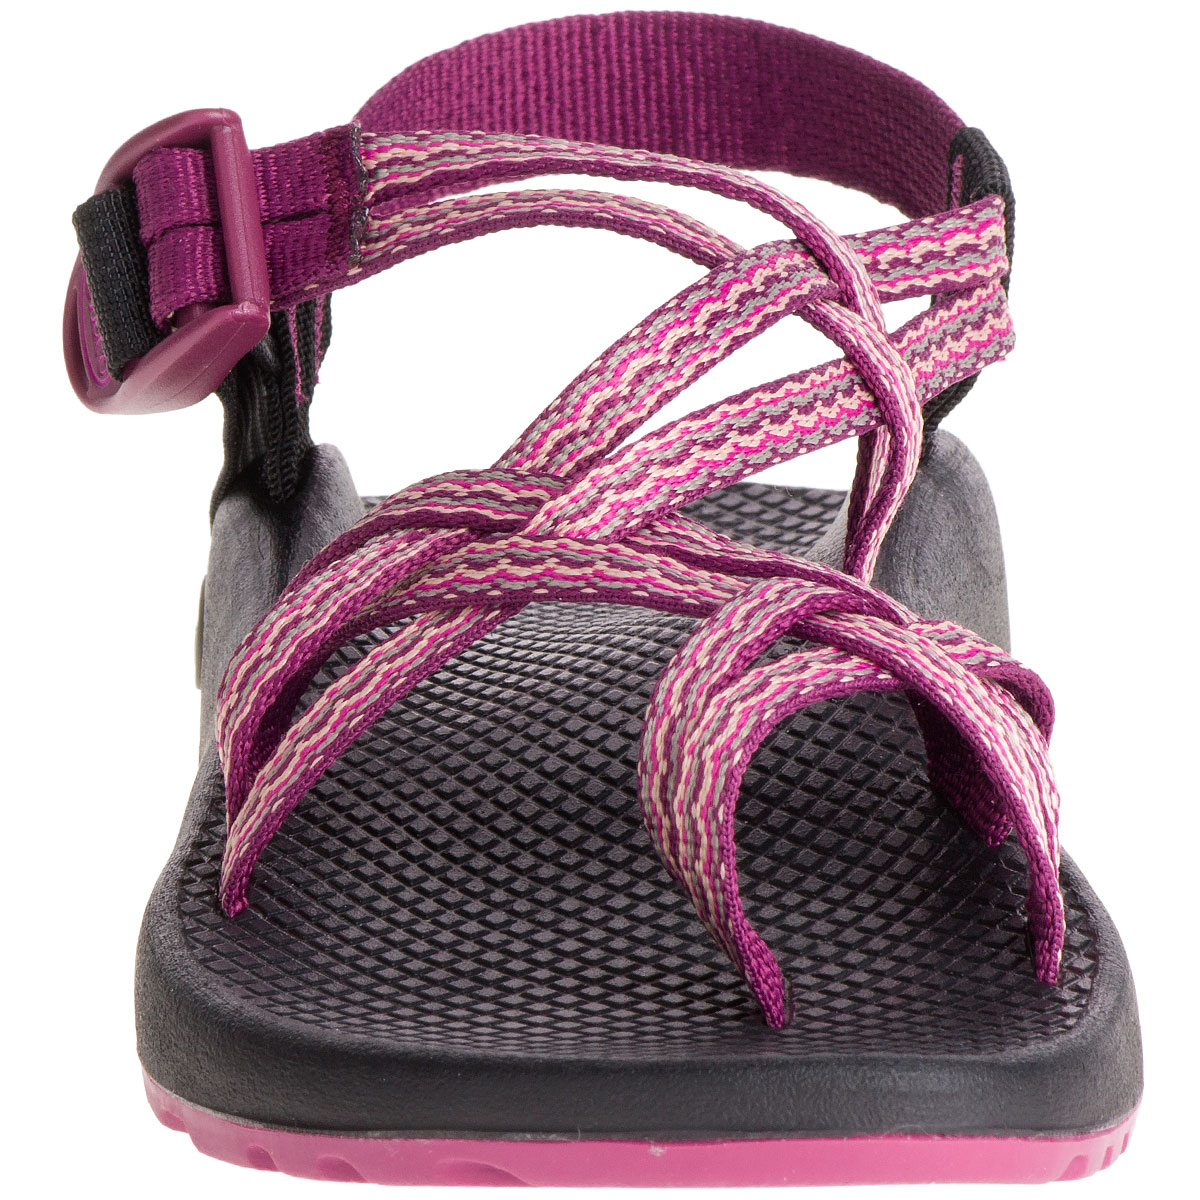 CHACO Women's ZX/2 Classic Sandals 